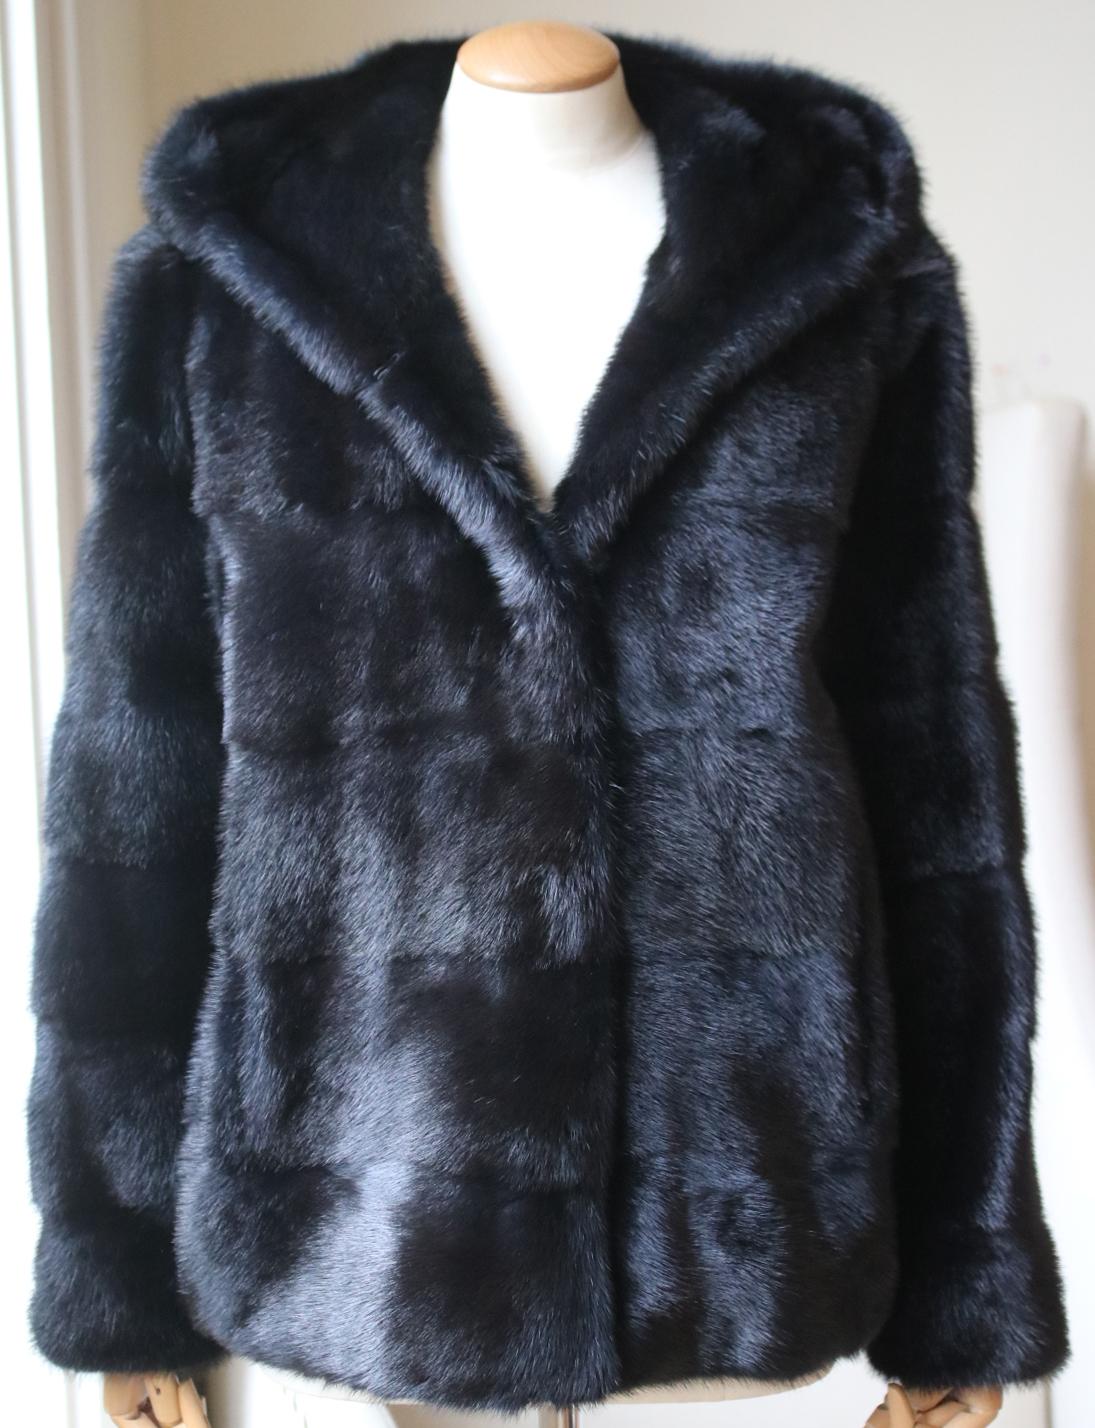 Mink-fur short hooded jacket from yves salomon. Rich black mink jacket with two pockets. Hooded neckline. Long sleeves. Hook fastening down the front. Colour: black. Made in france. 100% Mink fur. 

Size: FR 38 (UK 10, US 6, IT 42)

Condition: As